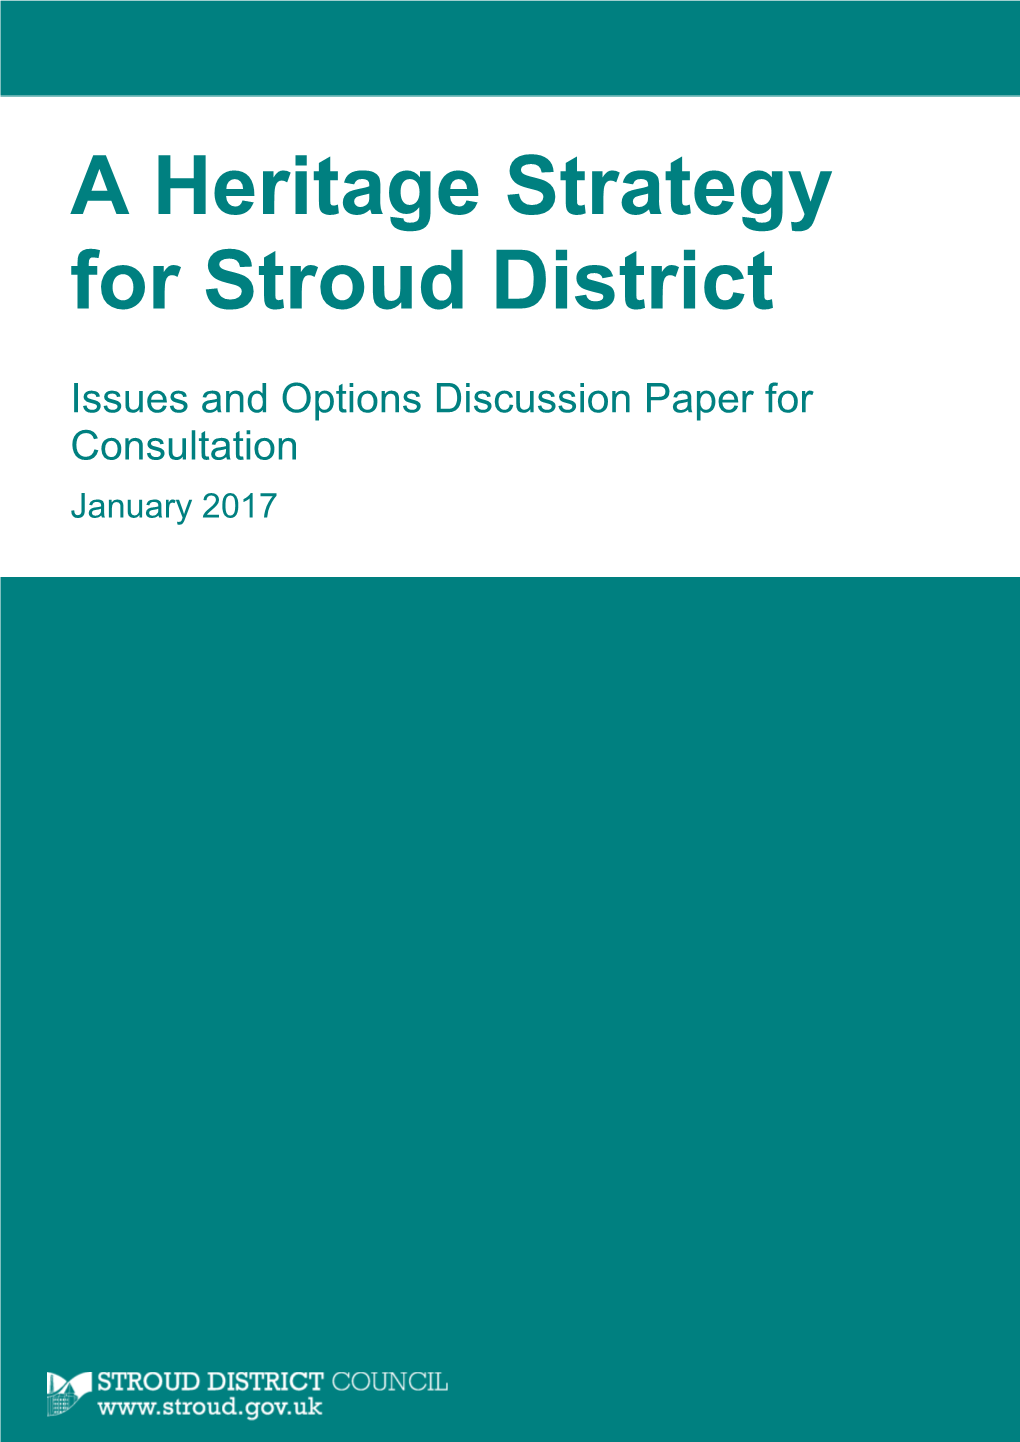 A Heritage Strategy for Stroud District